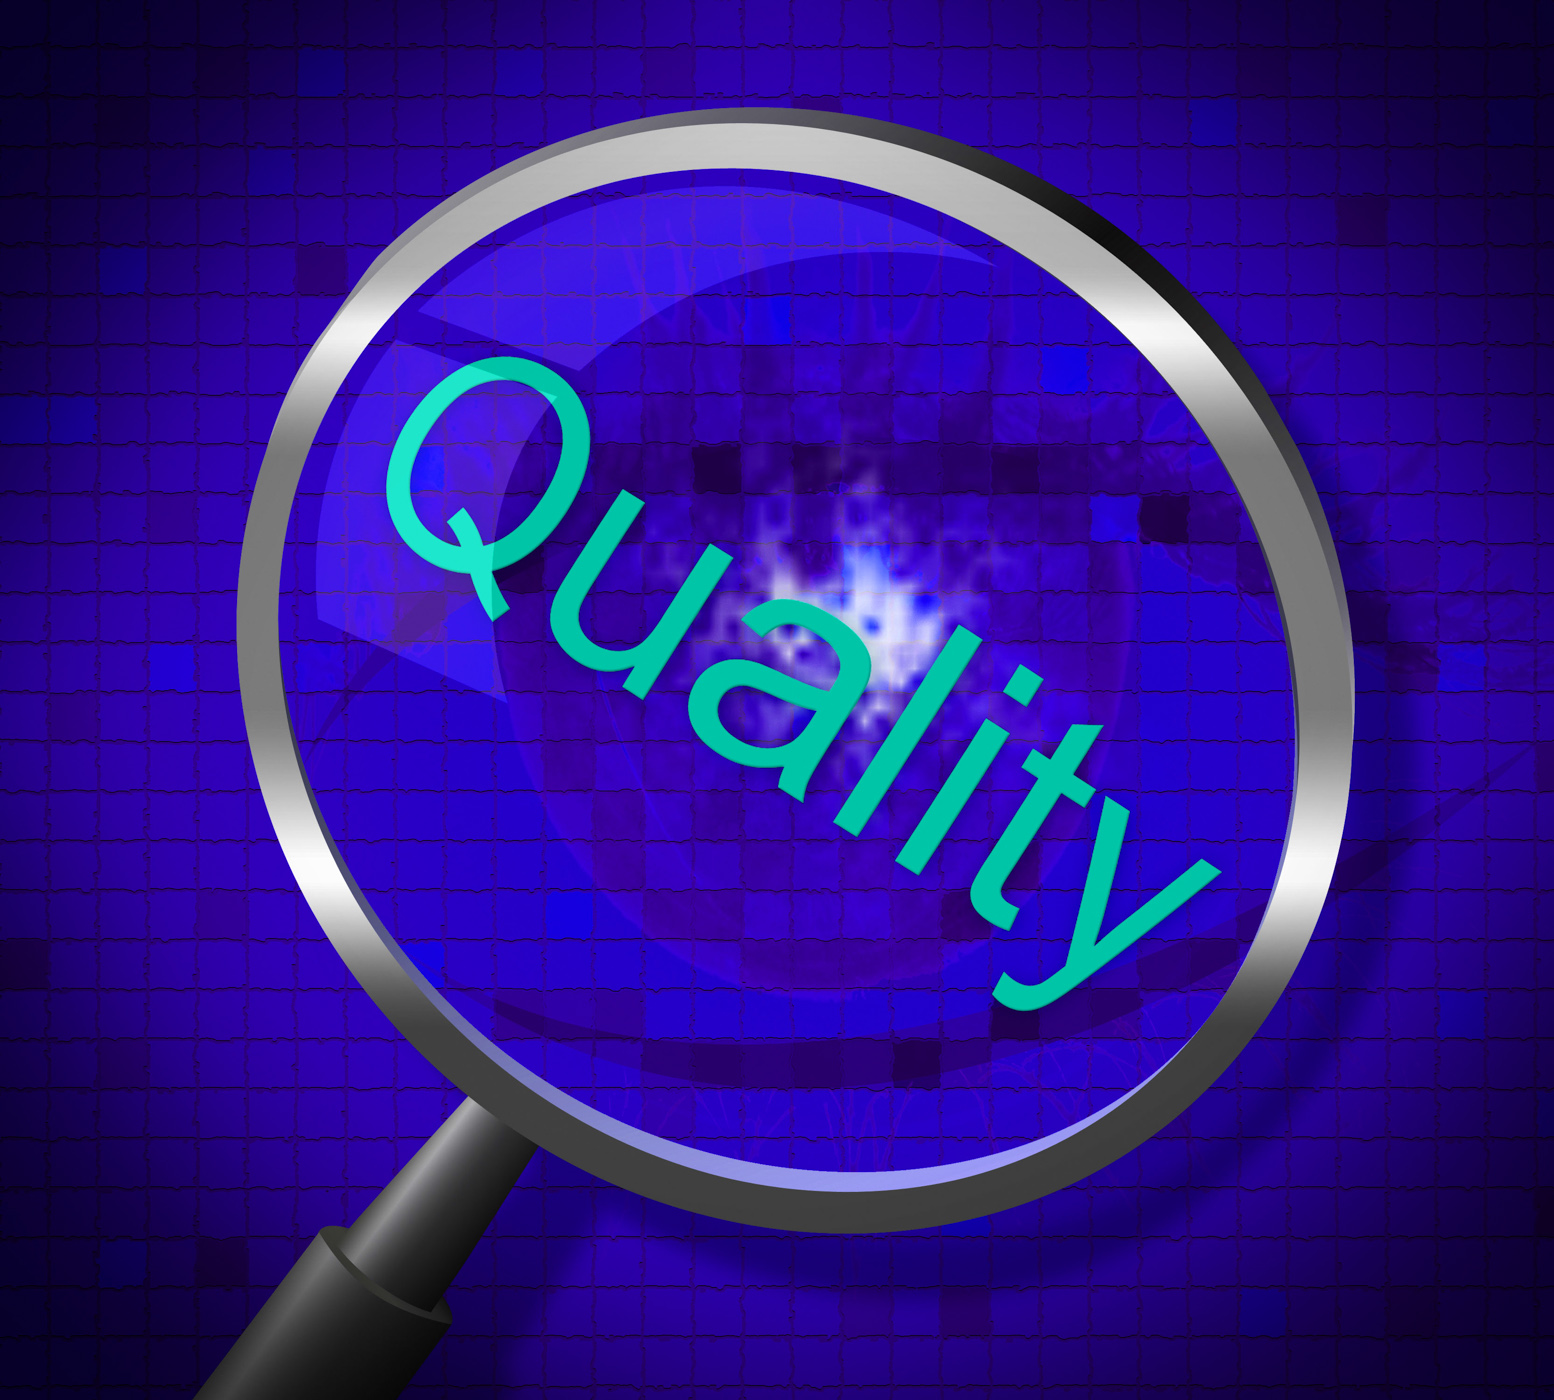 Magnifier quality indicates searches research and certified photo